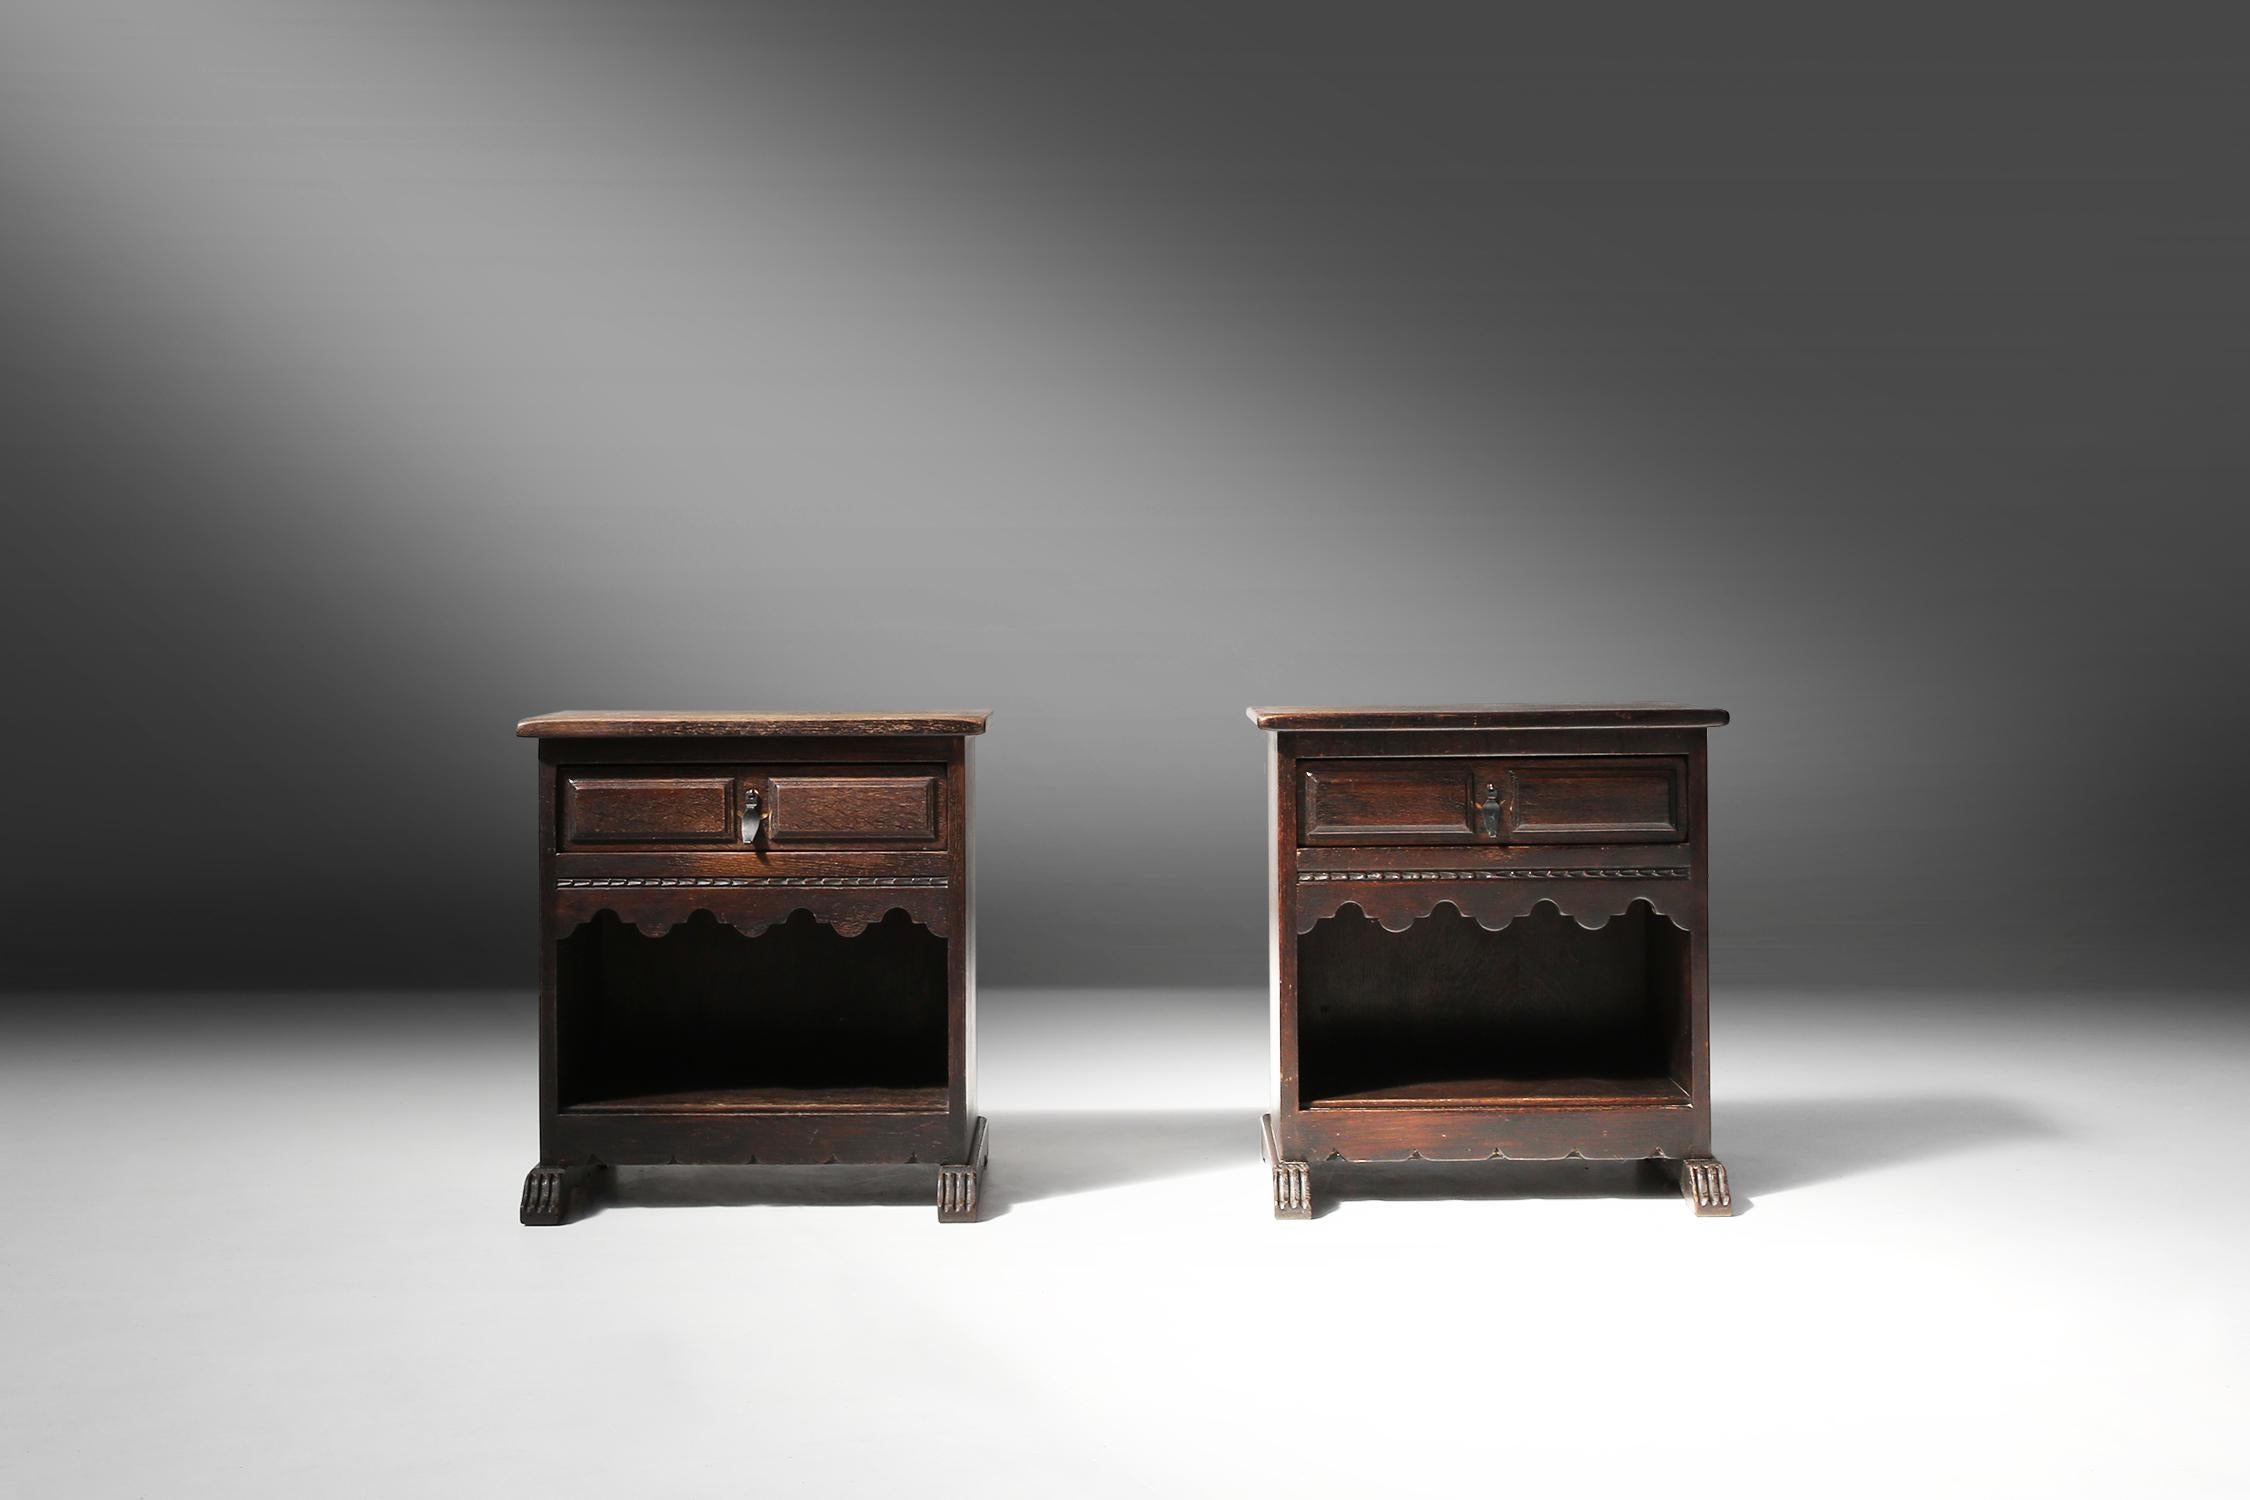 These two nightstands are made of wood and have a stylish black color. They are designed in a rustic style and have beautiful details such as wrought iron on the handle and hand-sculpted details in the wood. These nightstands are not only beautiful